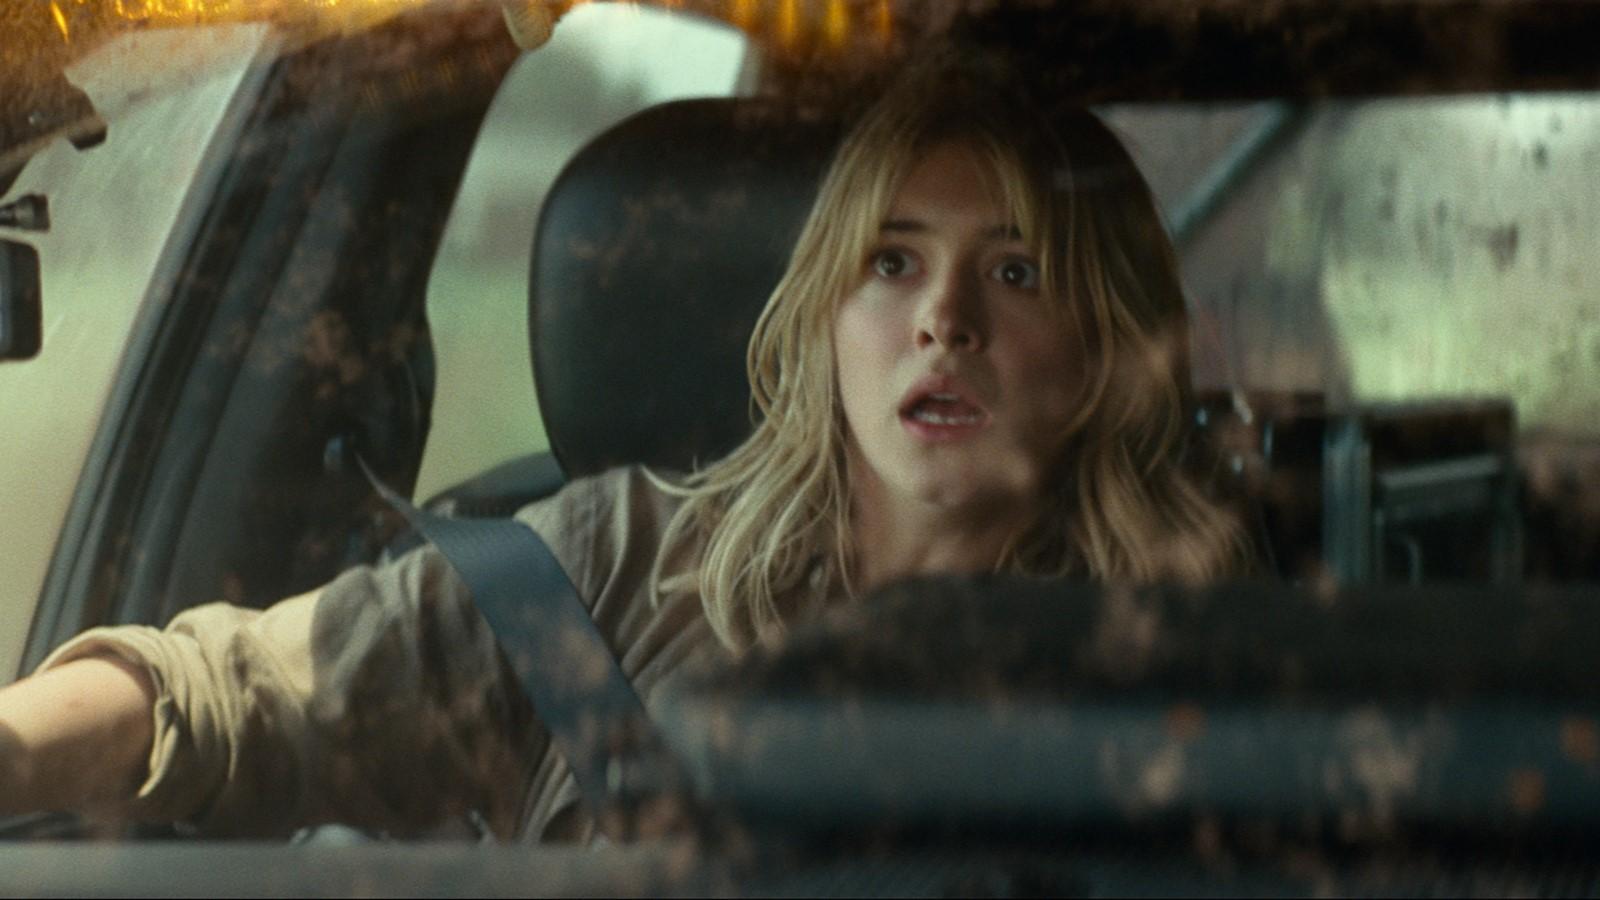 Twisters age rating: Daisy Edgar-Jones as Kate, sitting in a car and looking out the window